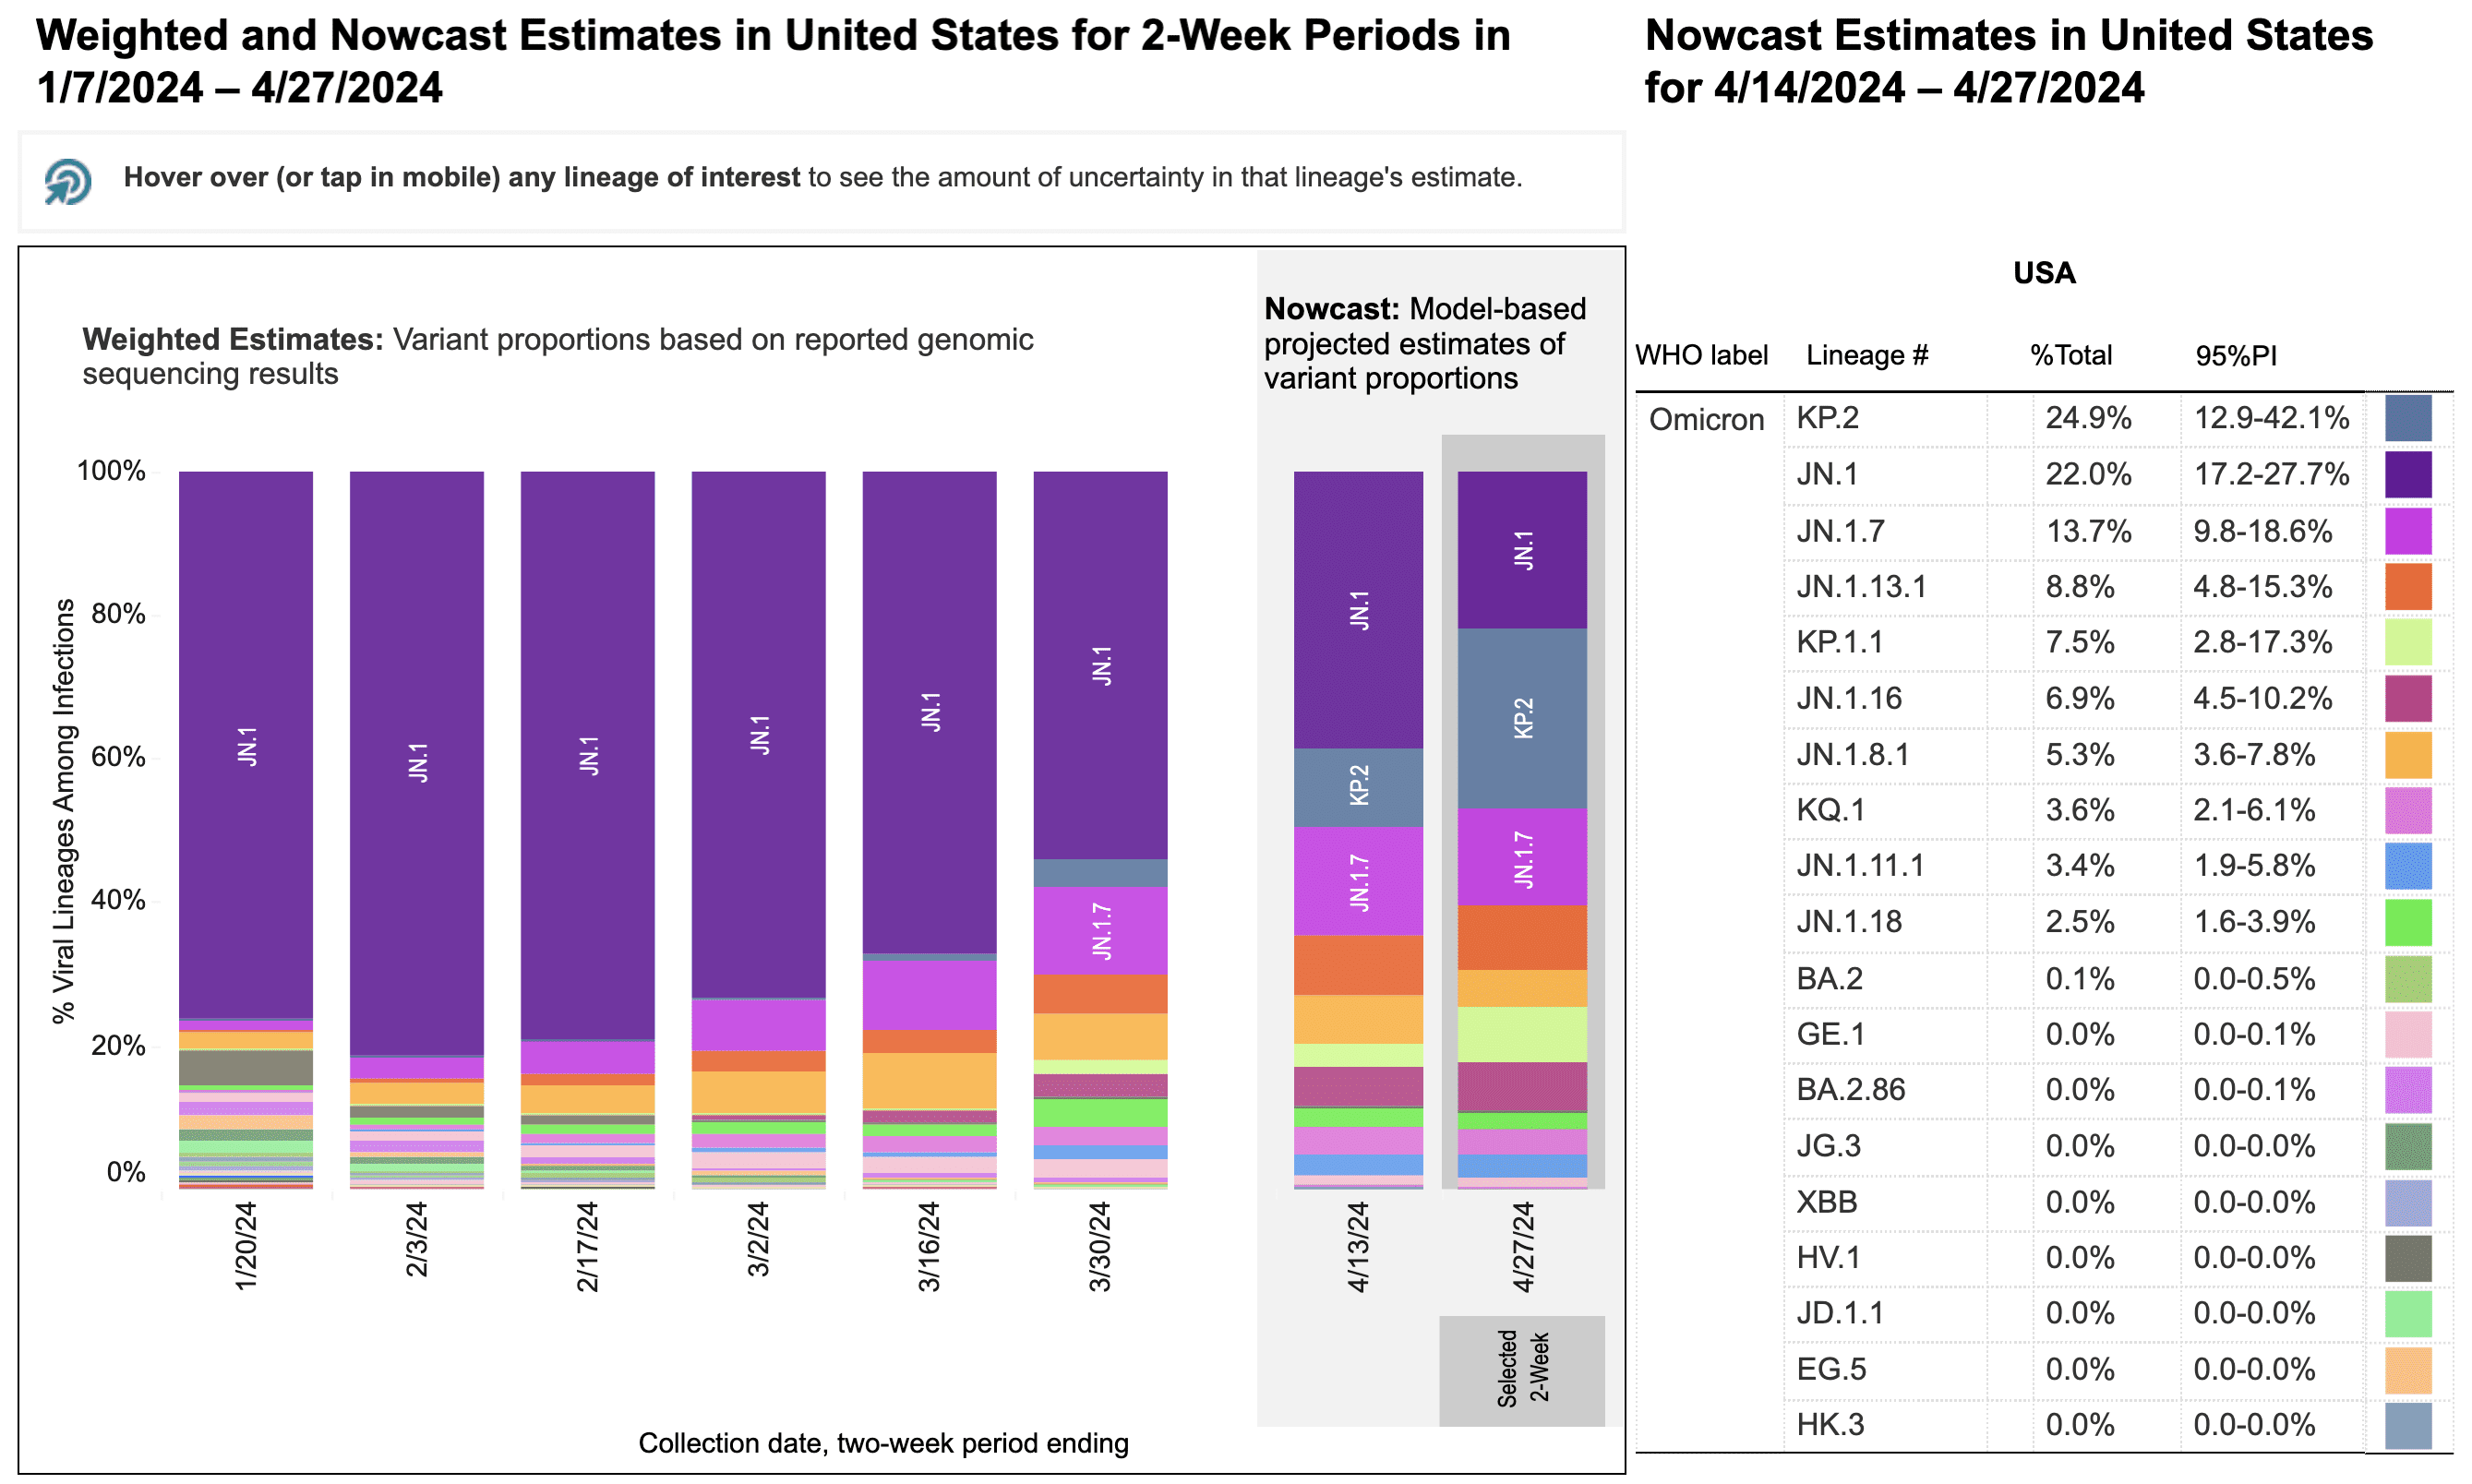 Two stacked bar charts with two-week periods for sample collection dates on the horizontal x-axis and percentage of viral lineages among infections on the vertical y-axis. Title of the first bar chart reads “Weighted Estimates: Variant proportions based on reported genomic sequencing results” with collection dates ranging from 1/7/24 to 4/27/2024. The second chart’s title reads “Nowcast: model-based projected estimates of variant proportions,” dates ranging from 4/13/24 to 4/27/2024. In the Nowcast Estimates for the period ending on 4/13/24, JN.1 (dark purple) is projected to be the highest at 38.8 percent, JN1.13 (dark pink) is 15.1 percent and KP.2 (blue) is 10.7%. Other variants are at smaller percentages represented by a handful of other colors as small slivers.The legend with a list of variants, proportions, and their associated colors is on the far right of the bar charts. Graphic source: CDC Variant Tracker